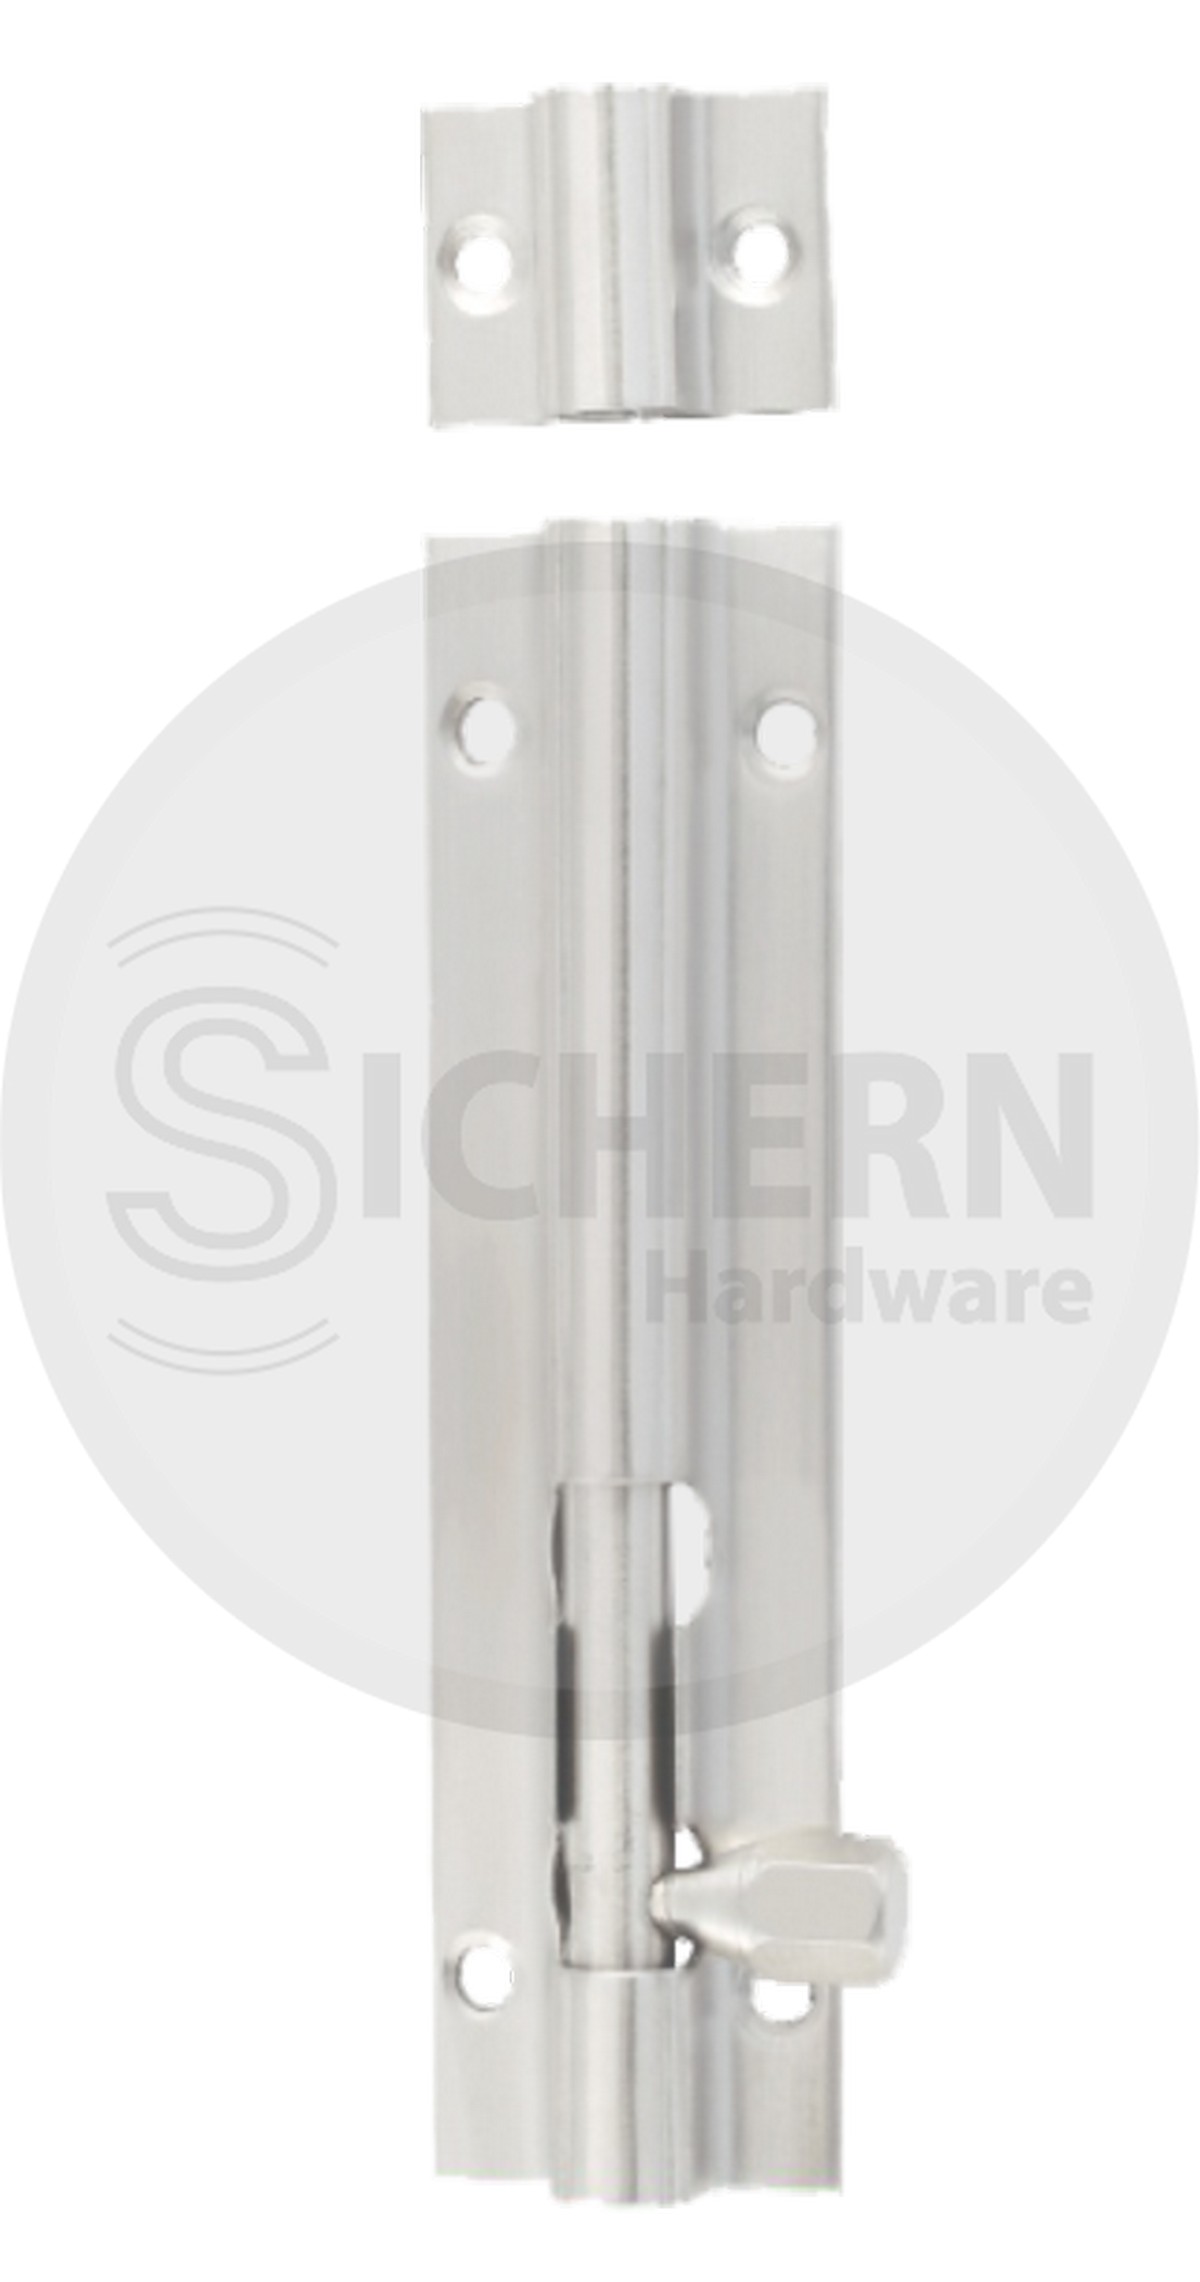 Stainless Steel Barrel Bolt 100 X 25MM - Satin (Scp)